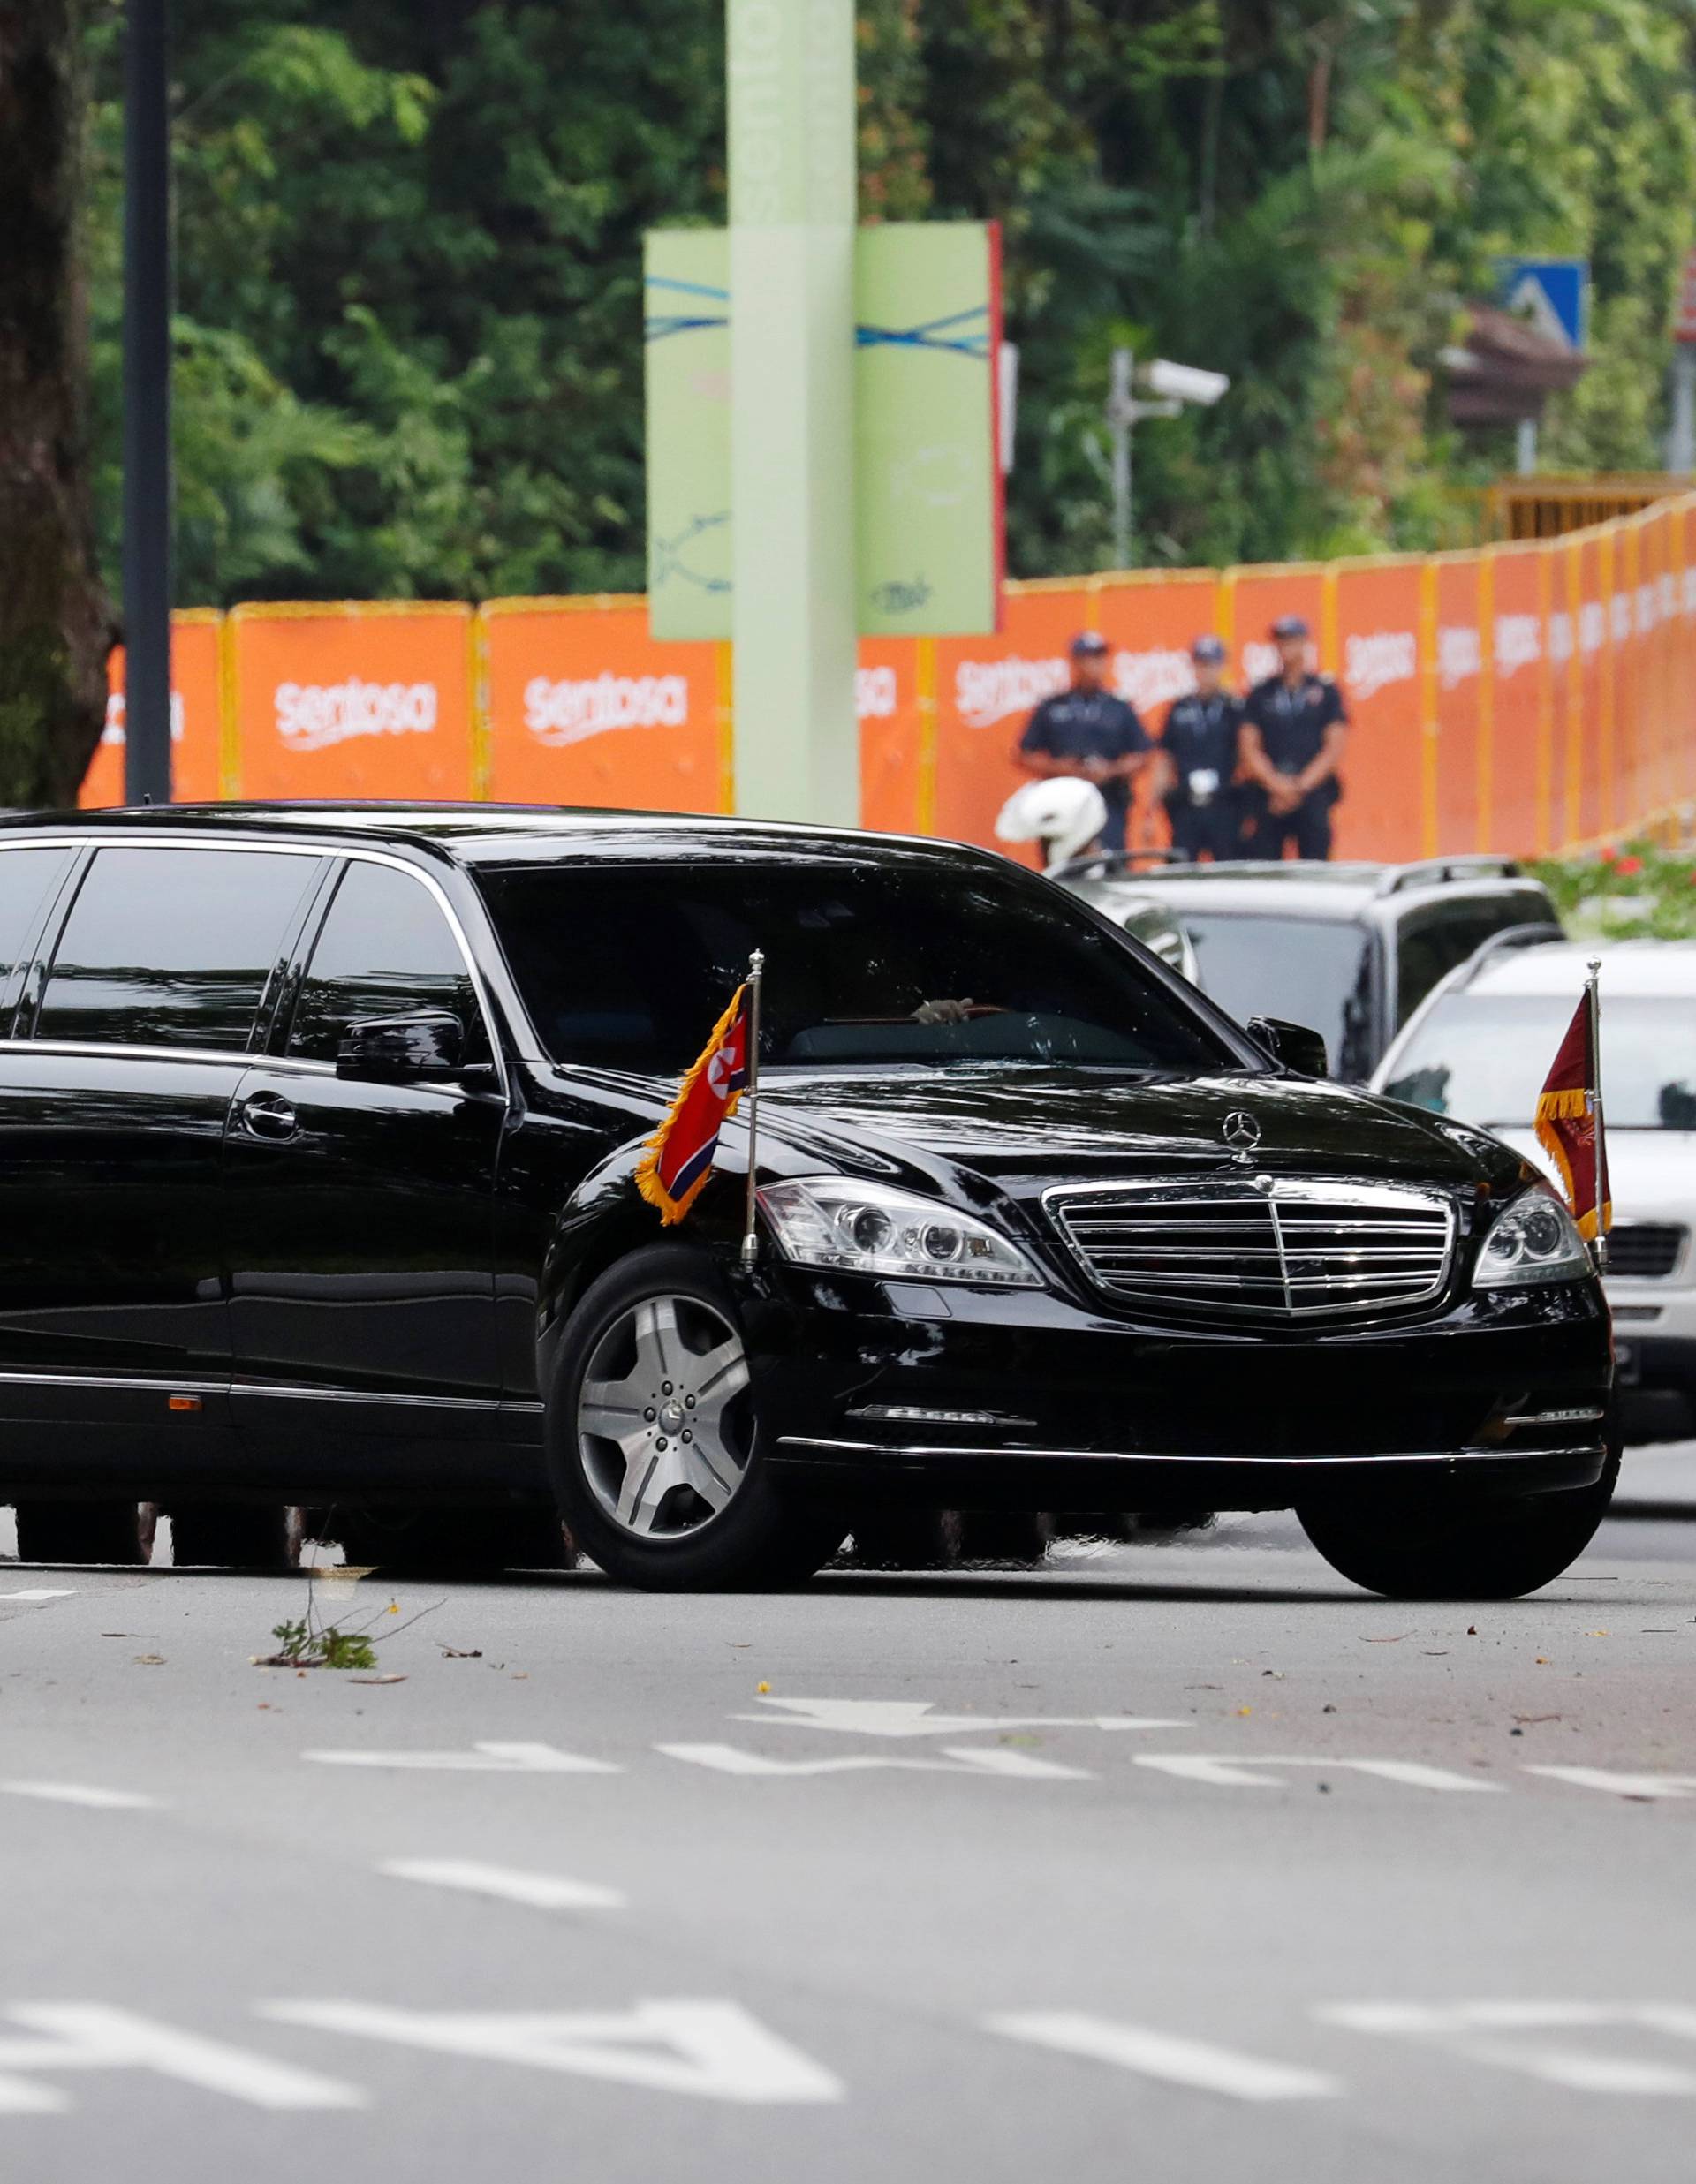 The motorcade of North Korea's leader Kim Jong Un arrives at the Capella hotel, the venue of the summit between North Korea and the U.S., on Sentosa island in Singapore